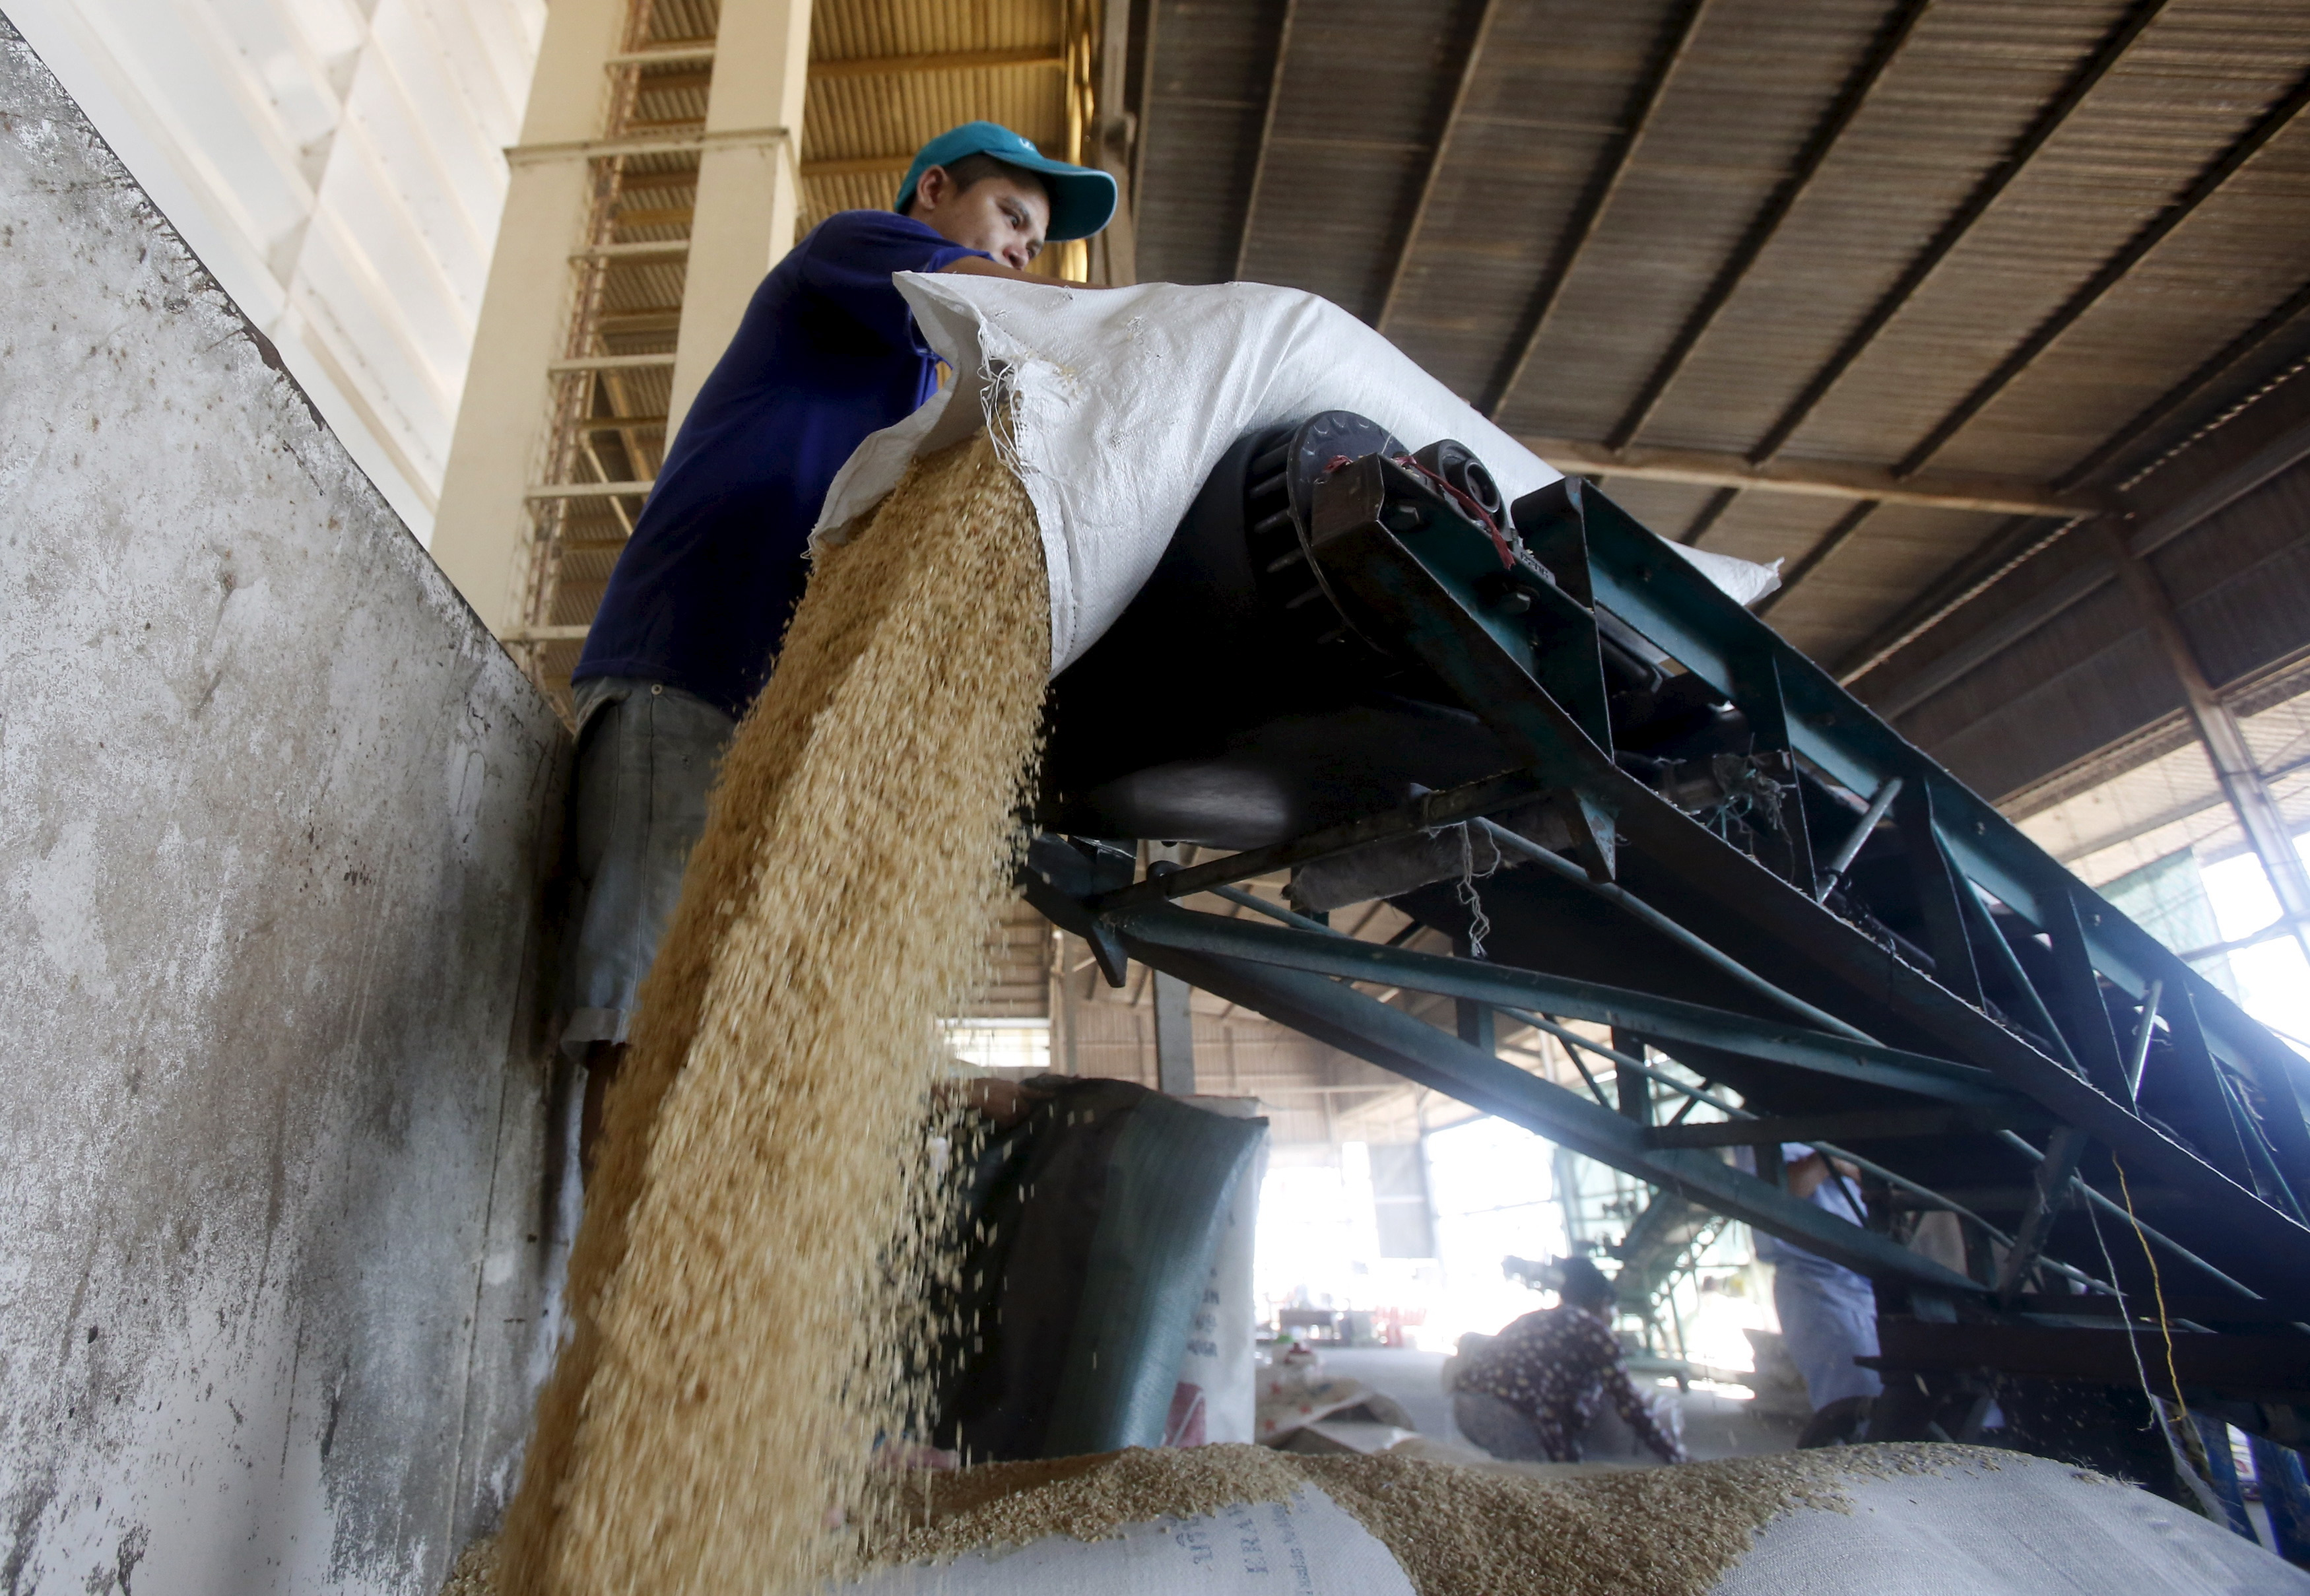 A man works at a rice processing factory in Vietnam's southern Mekong delta city of Can Tho